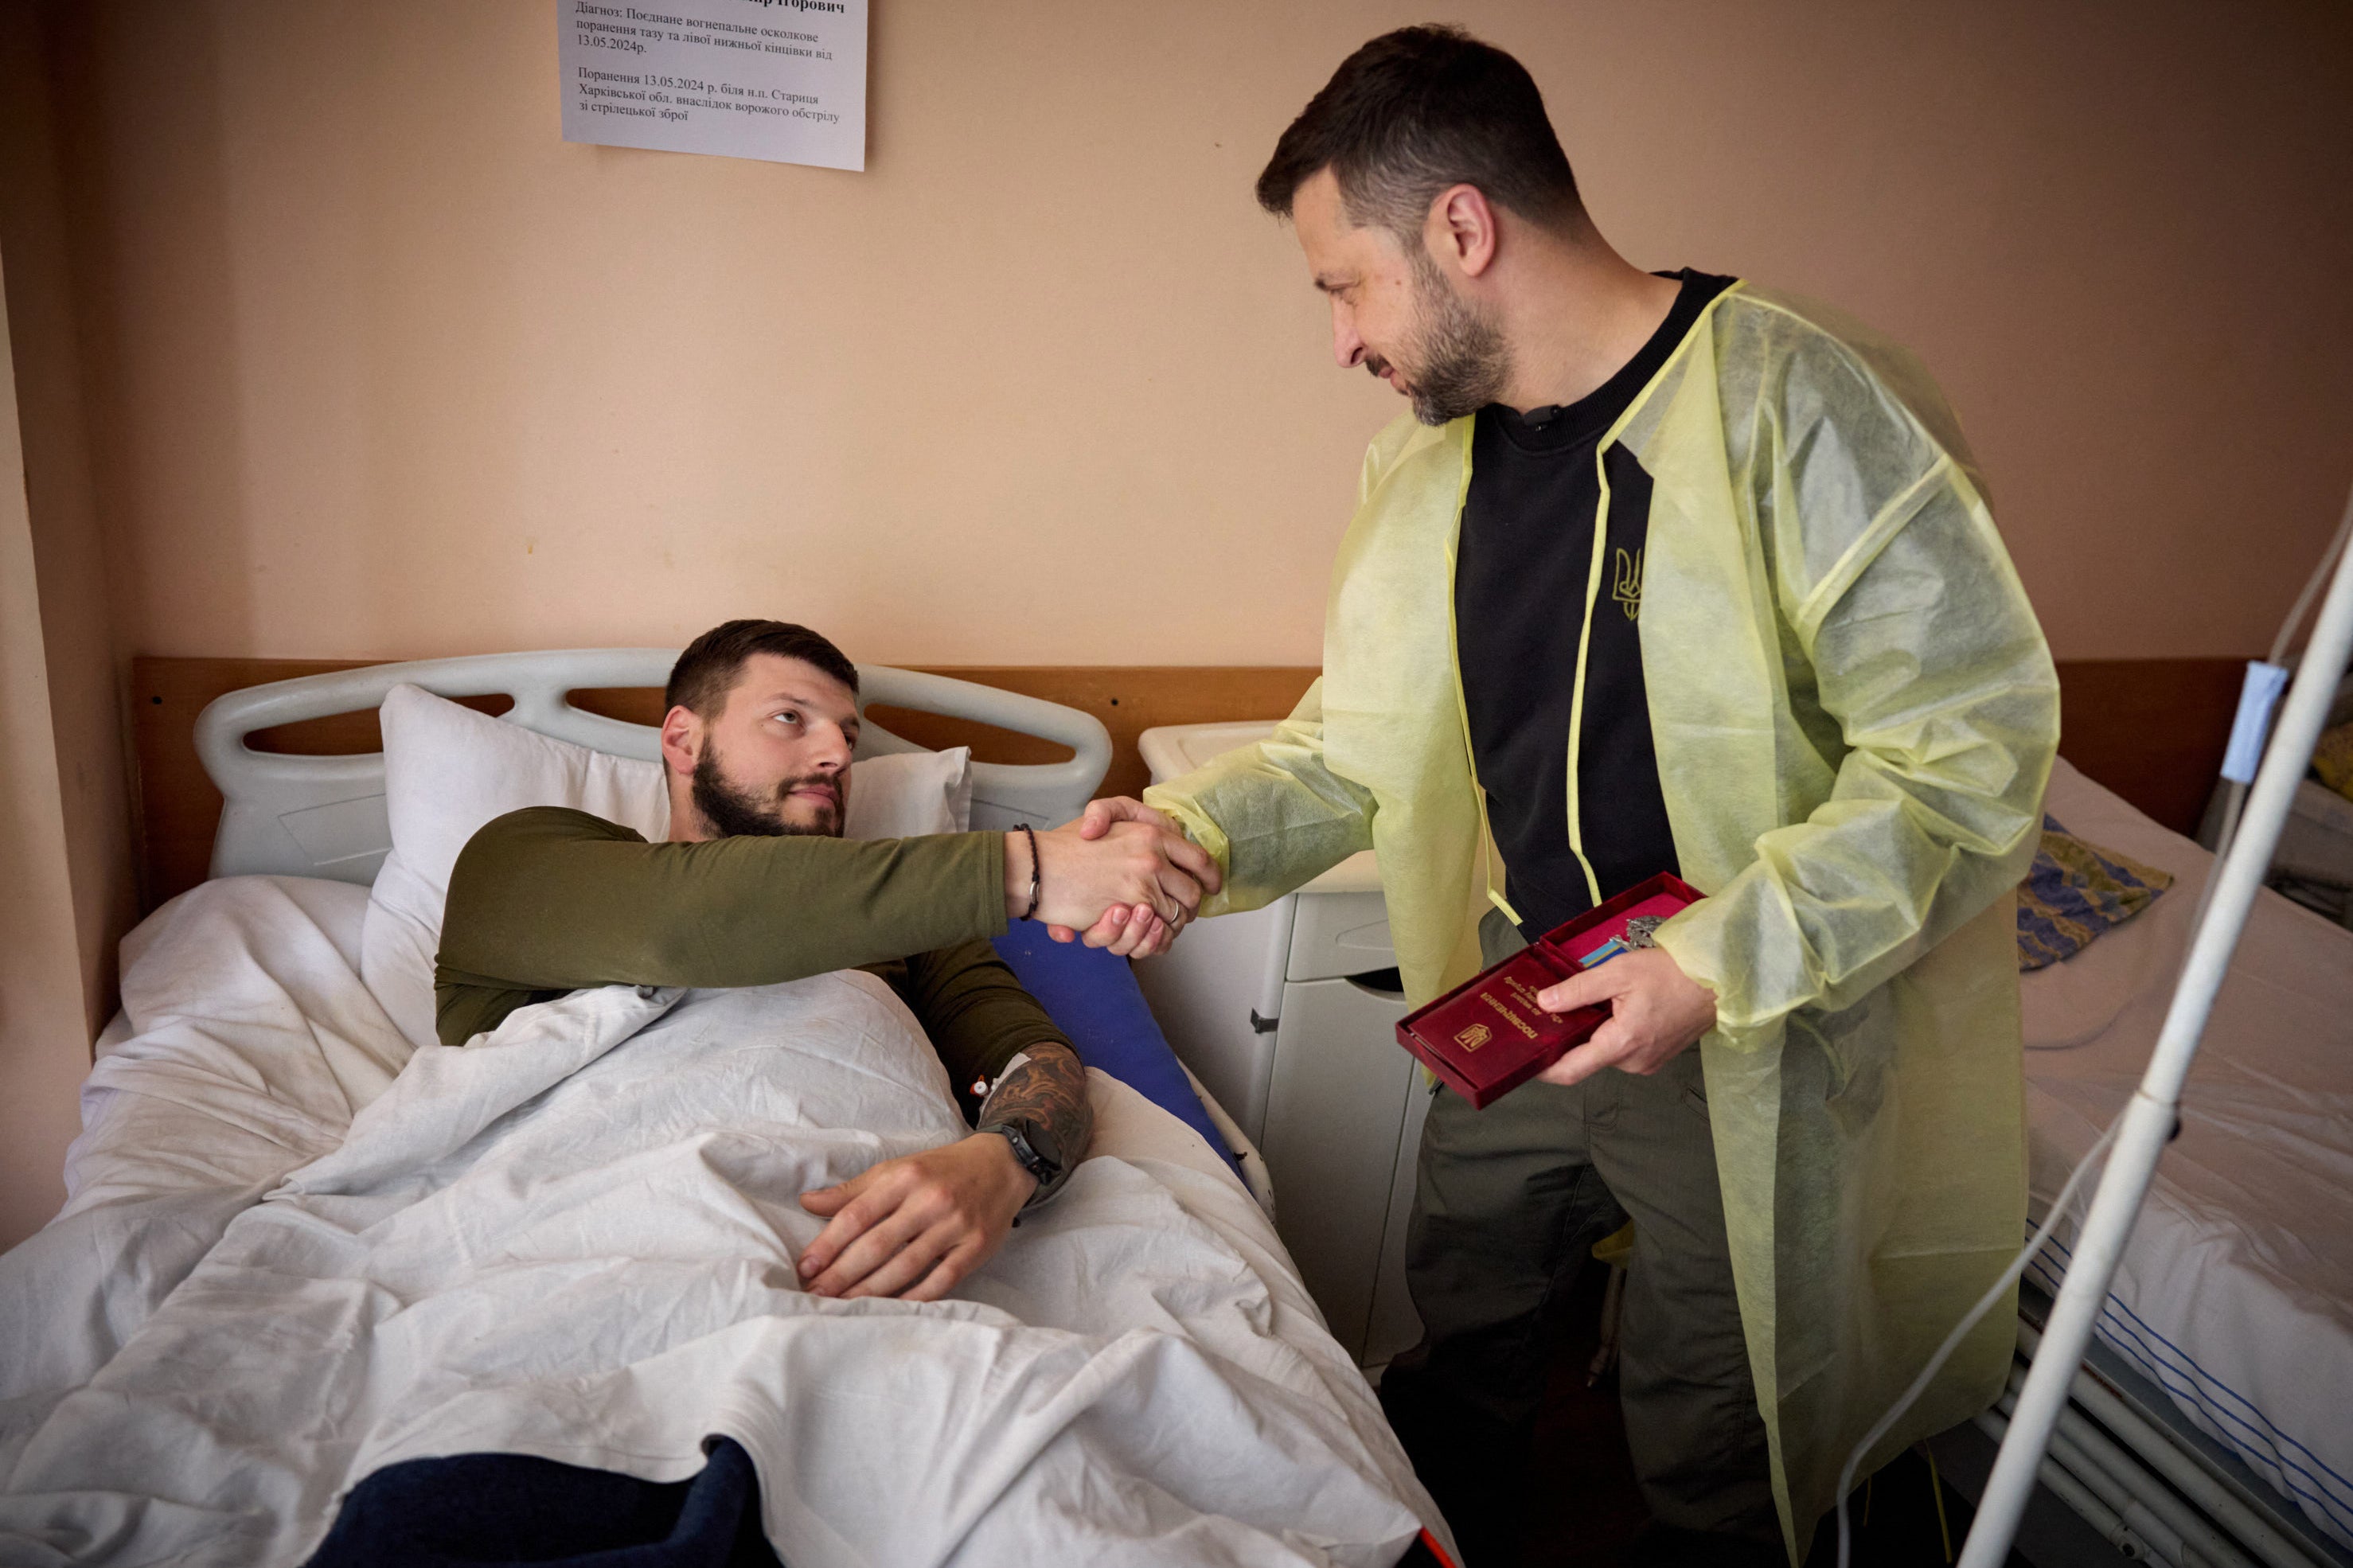 Zelensky met with wounded servicemen during his visit to Kharkiv